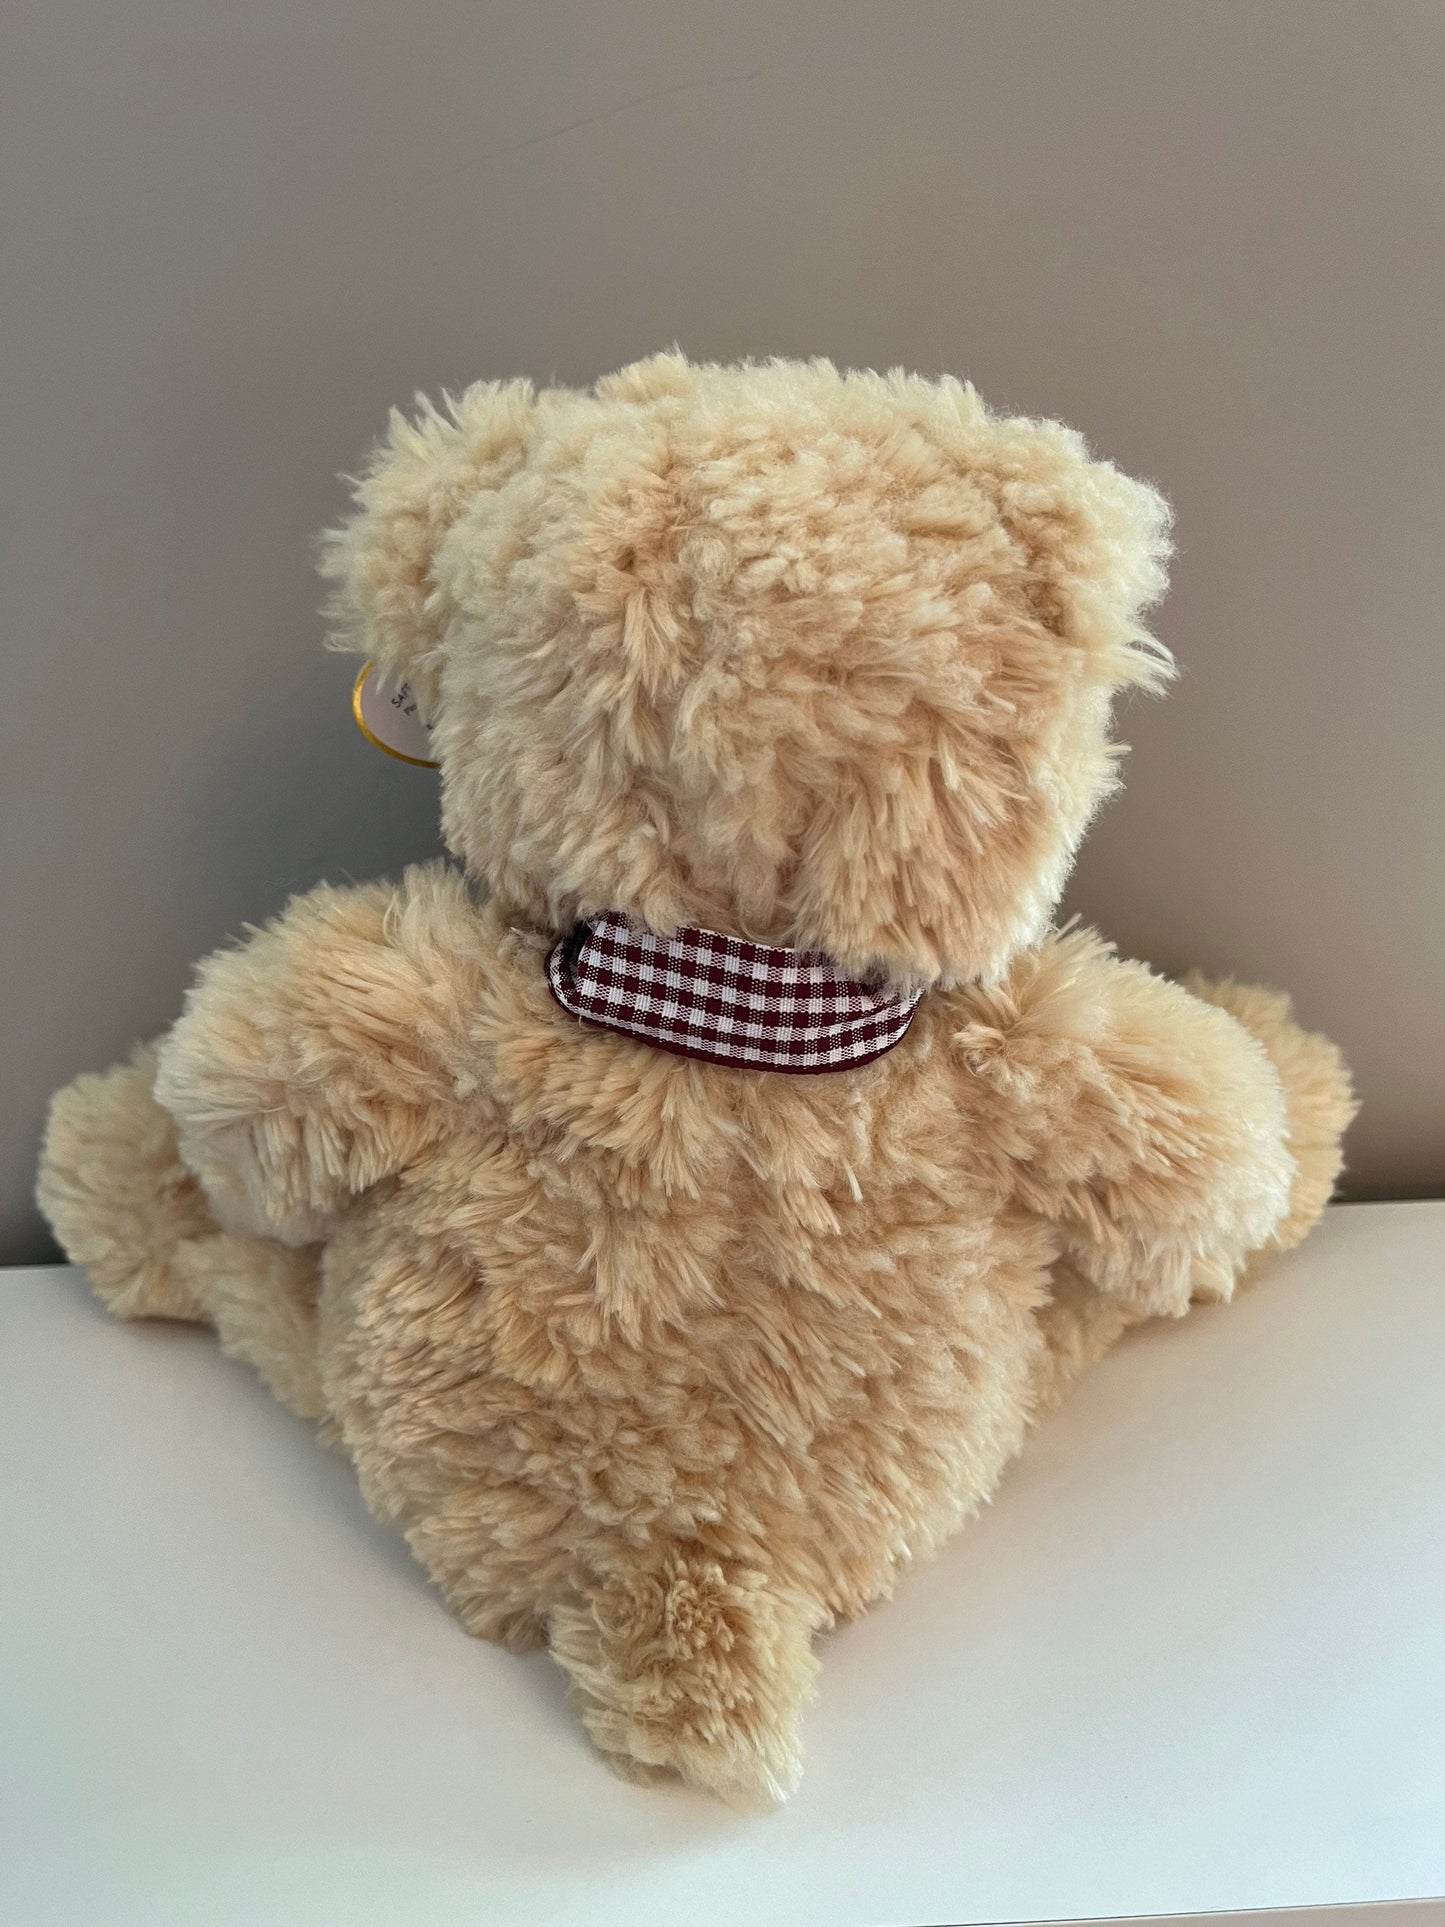 Ty Classics Collection “Boudreaux” the Adorable Teddy Bear (13 inch)